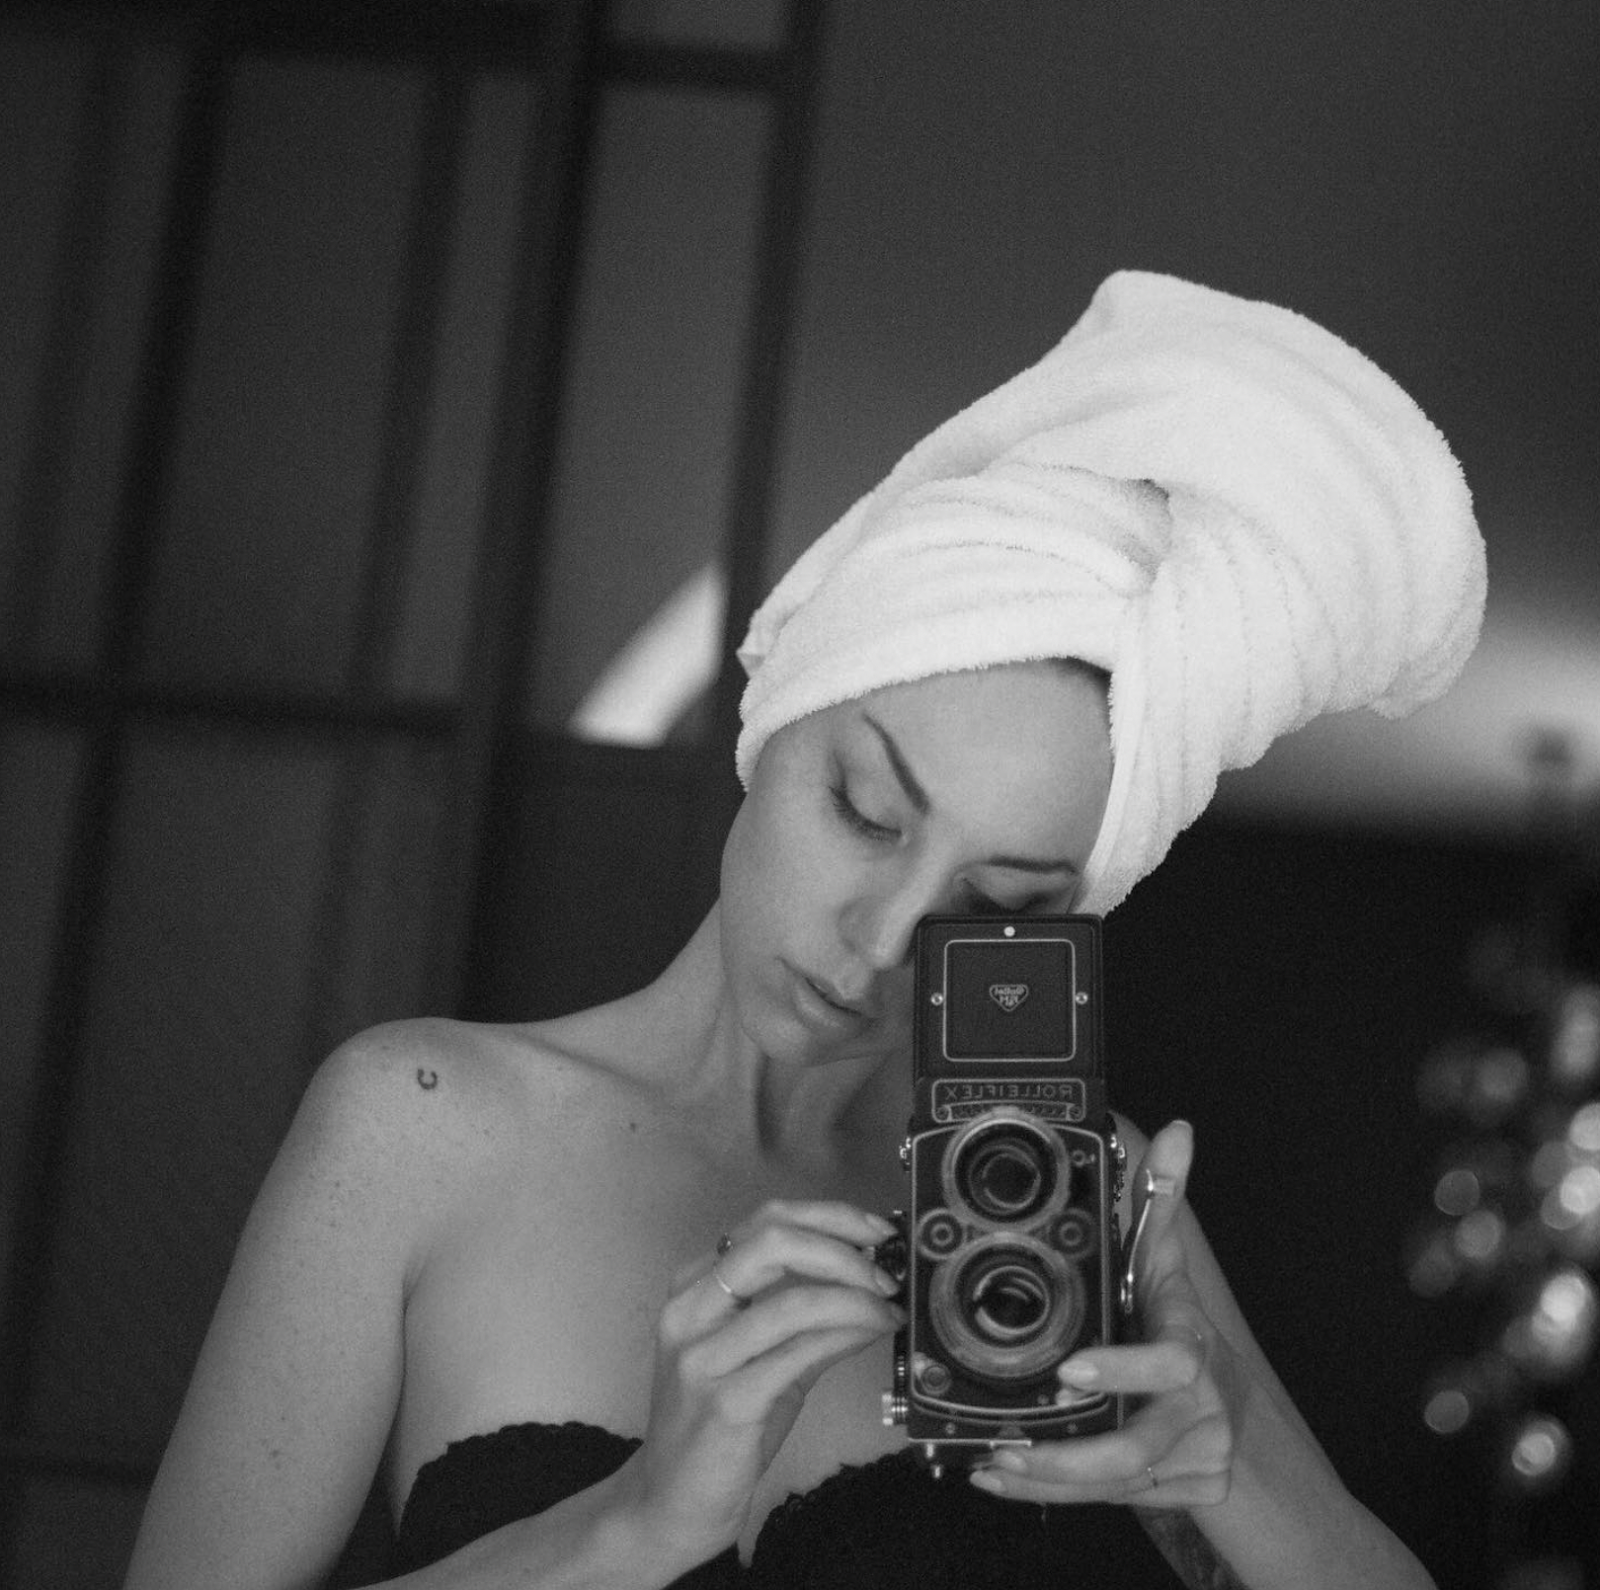 A black and white self portrait taken by photographer Allister Ann of her looking through a vintage camera with a white towel on her head.